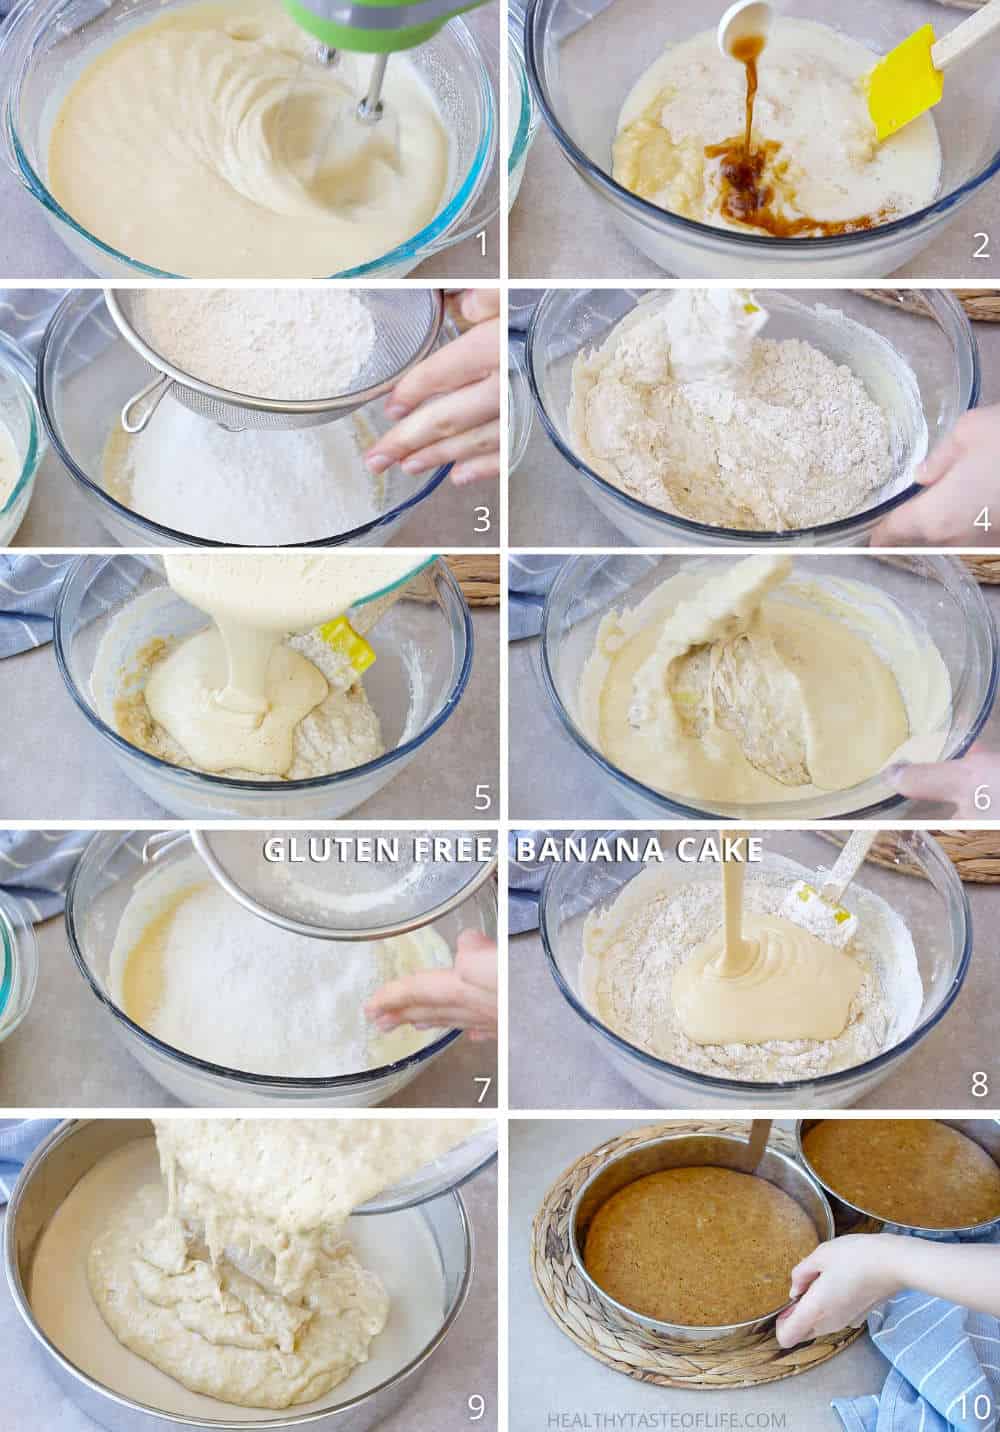 Step by step Process shot Instructions: How to make gluten free banana cake, how to make the batter and prepare it for baking